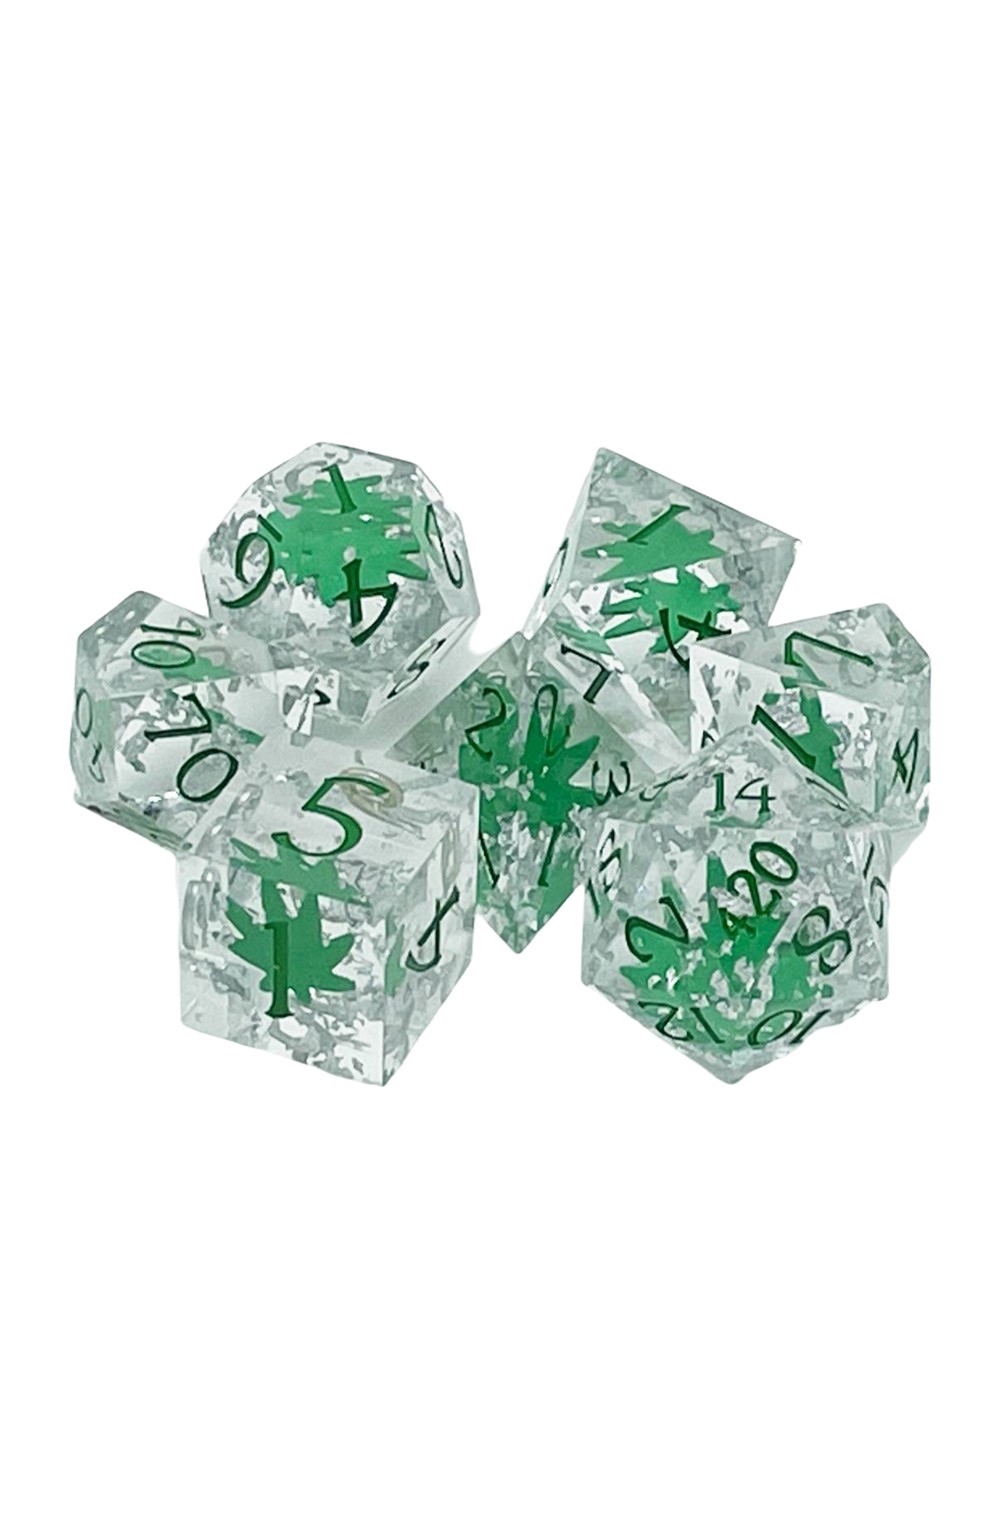 Old School 7 Piece Dnd Rpg Dice Set: Sharp Edged - It's 4:20 Time - Green W/ Silver